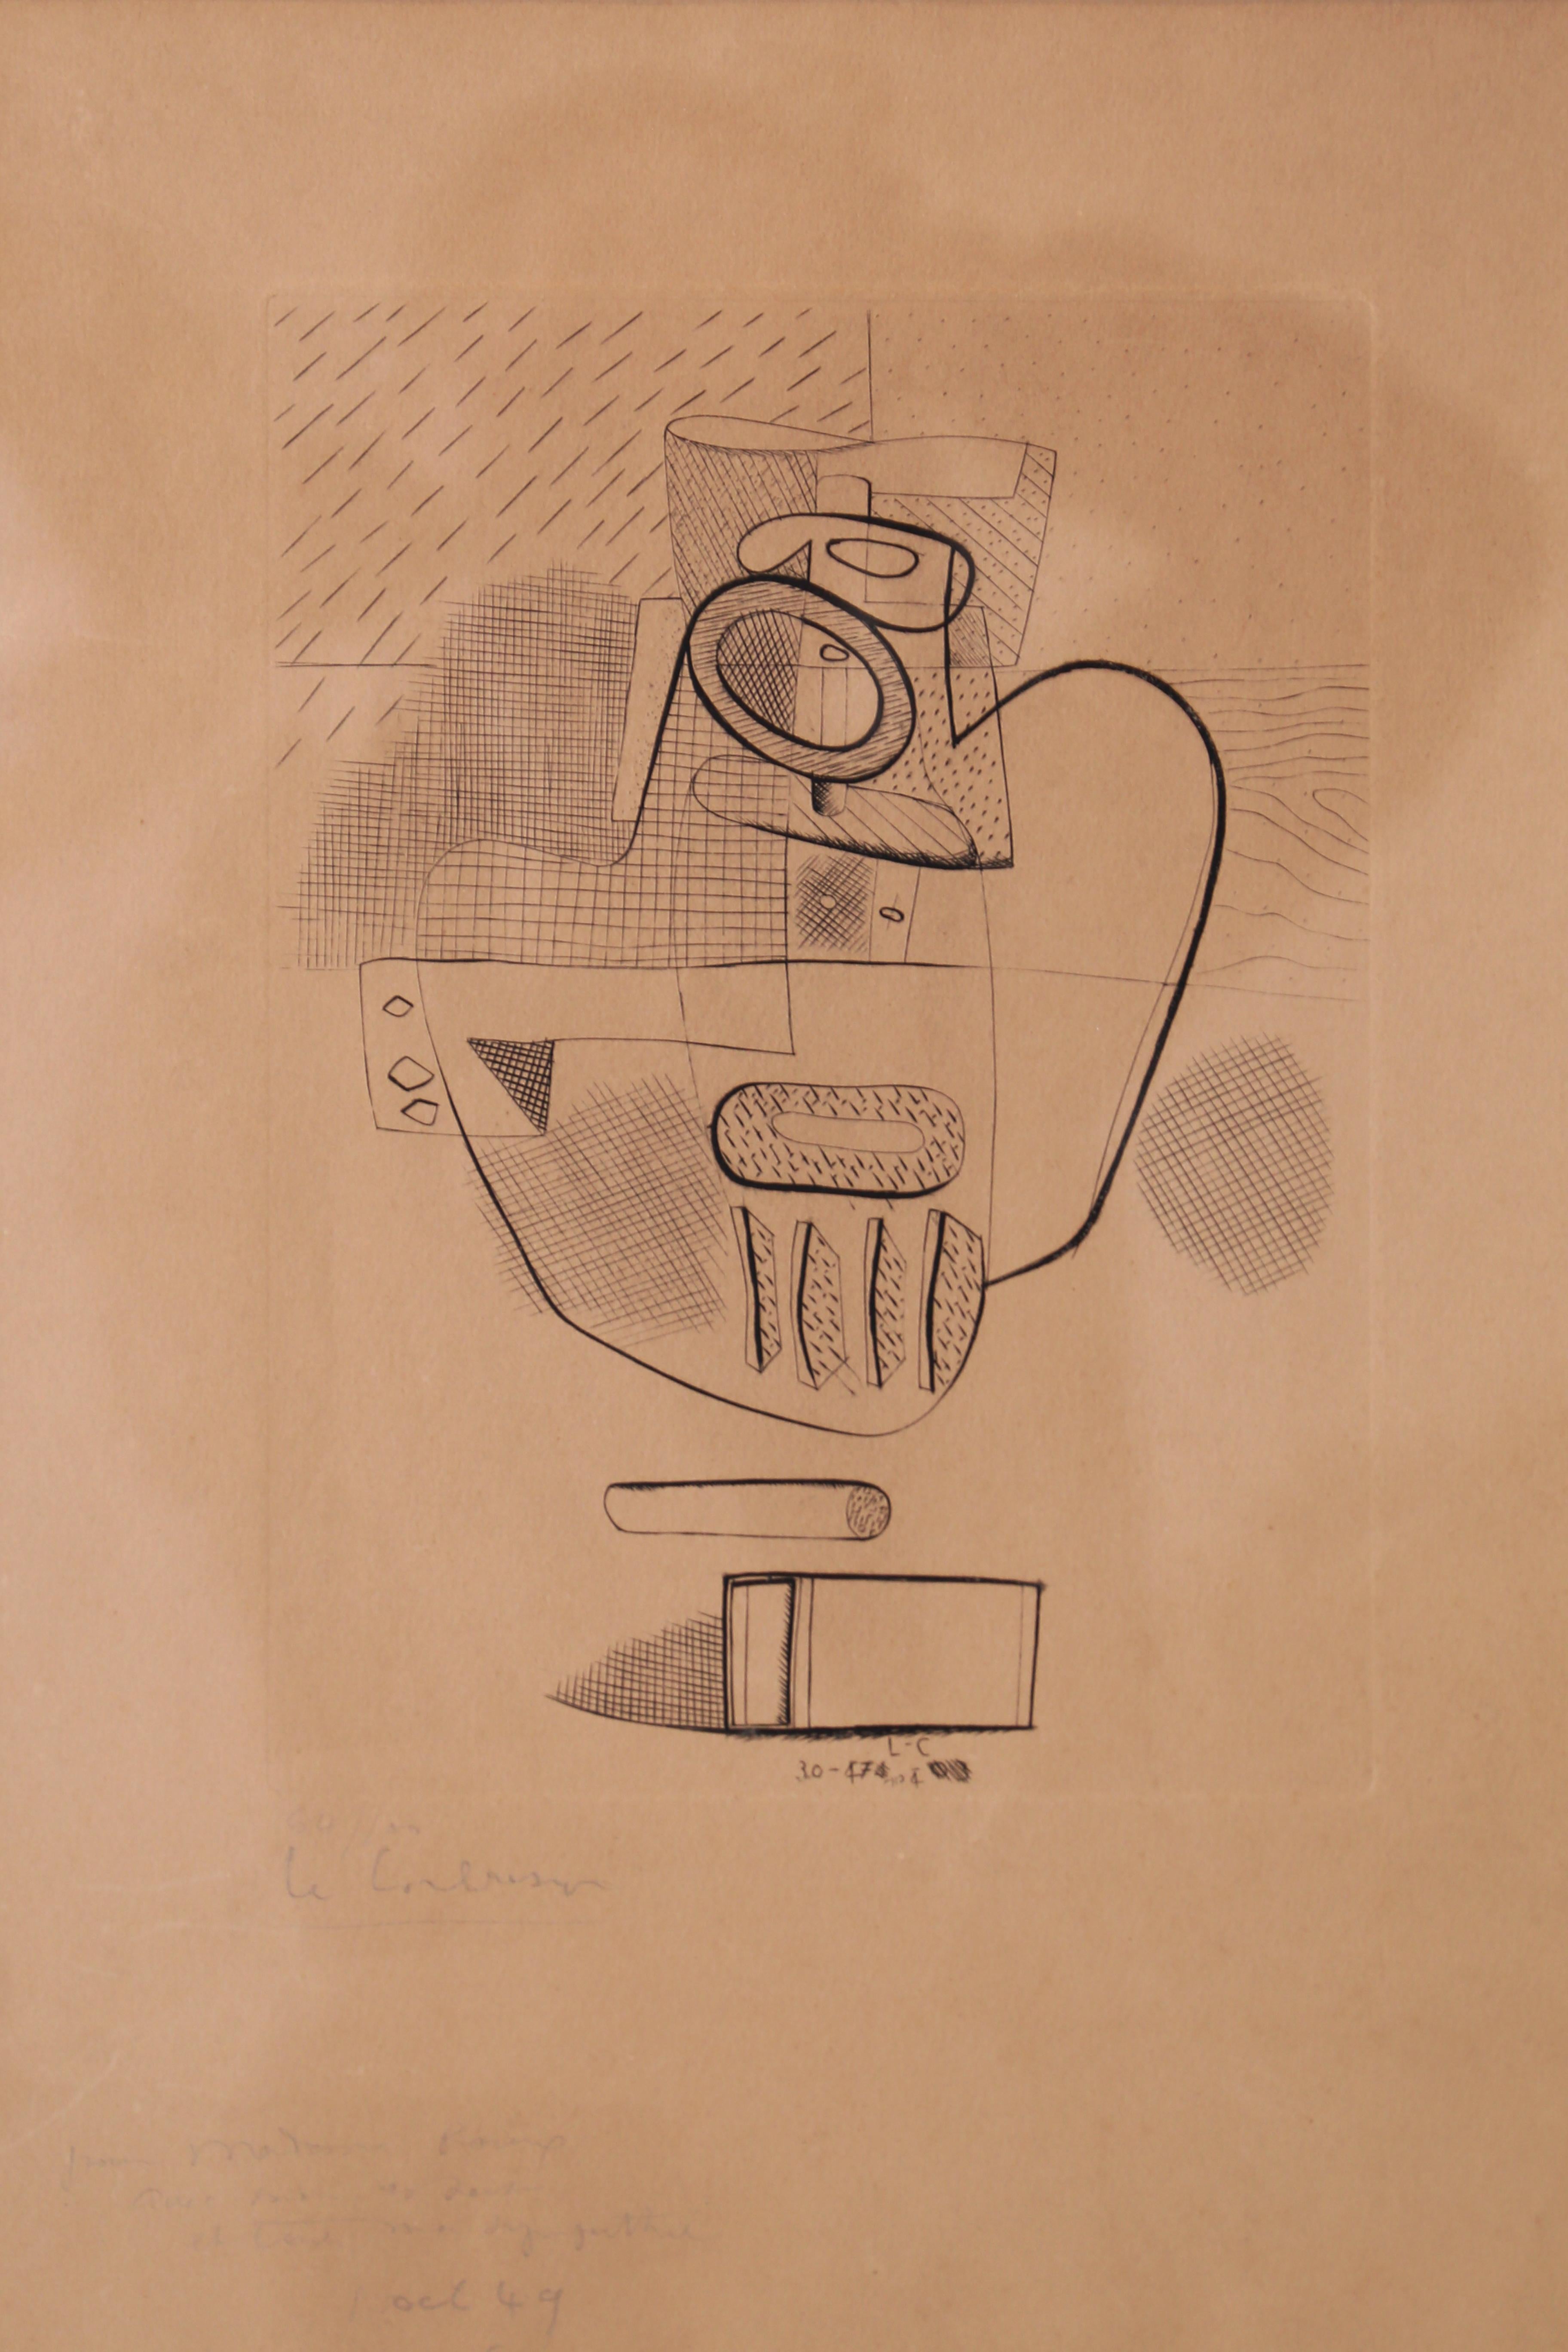 'Nature Morte' by Le Corbusier
1930/1947
Etching on wove paper, signed in pencil, numbered 64/100 with a dedication in pencil.
64/100
37 x 27 cm.
 